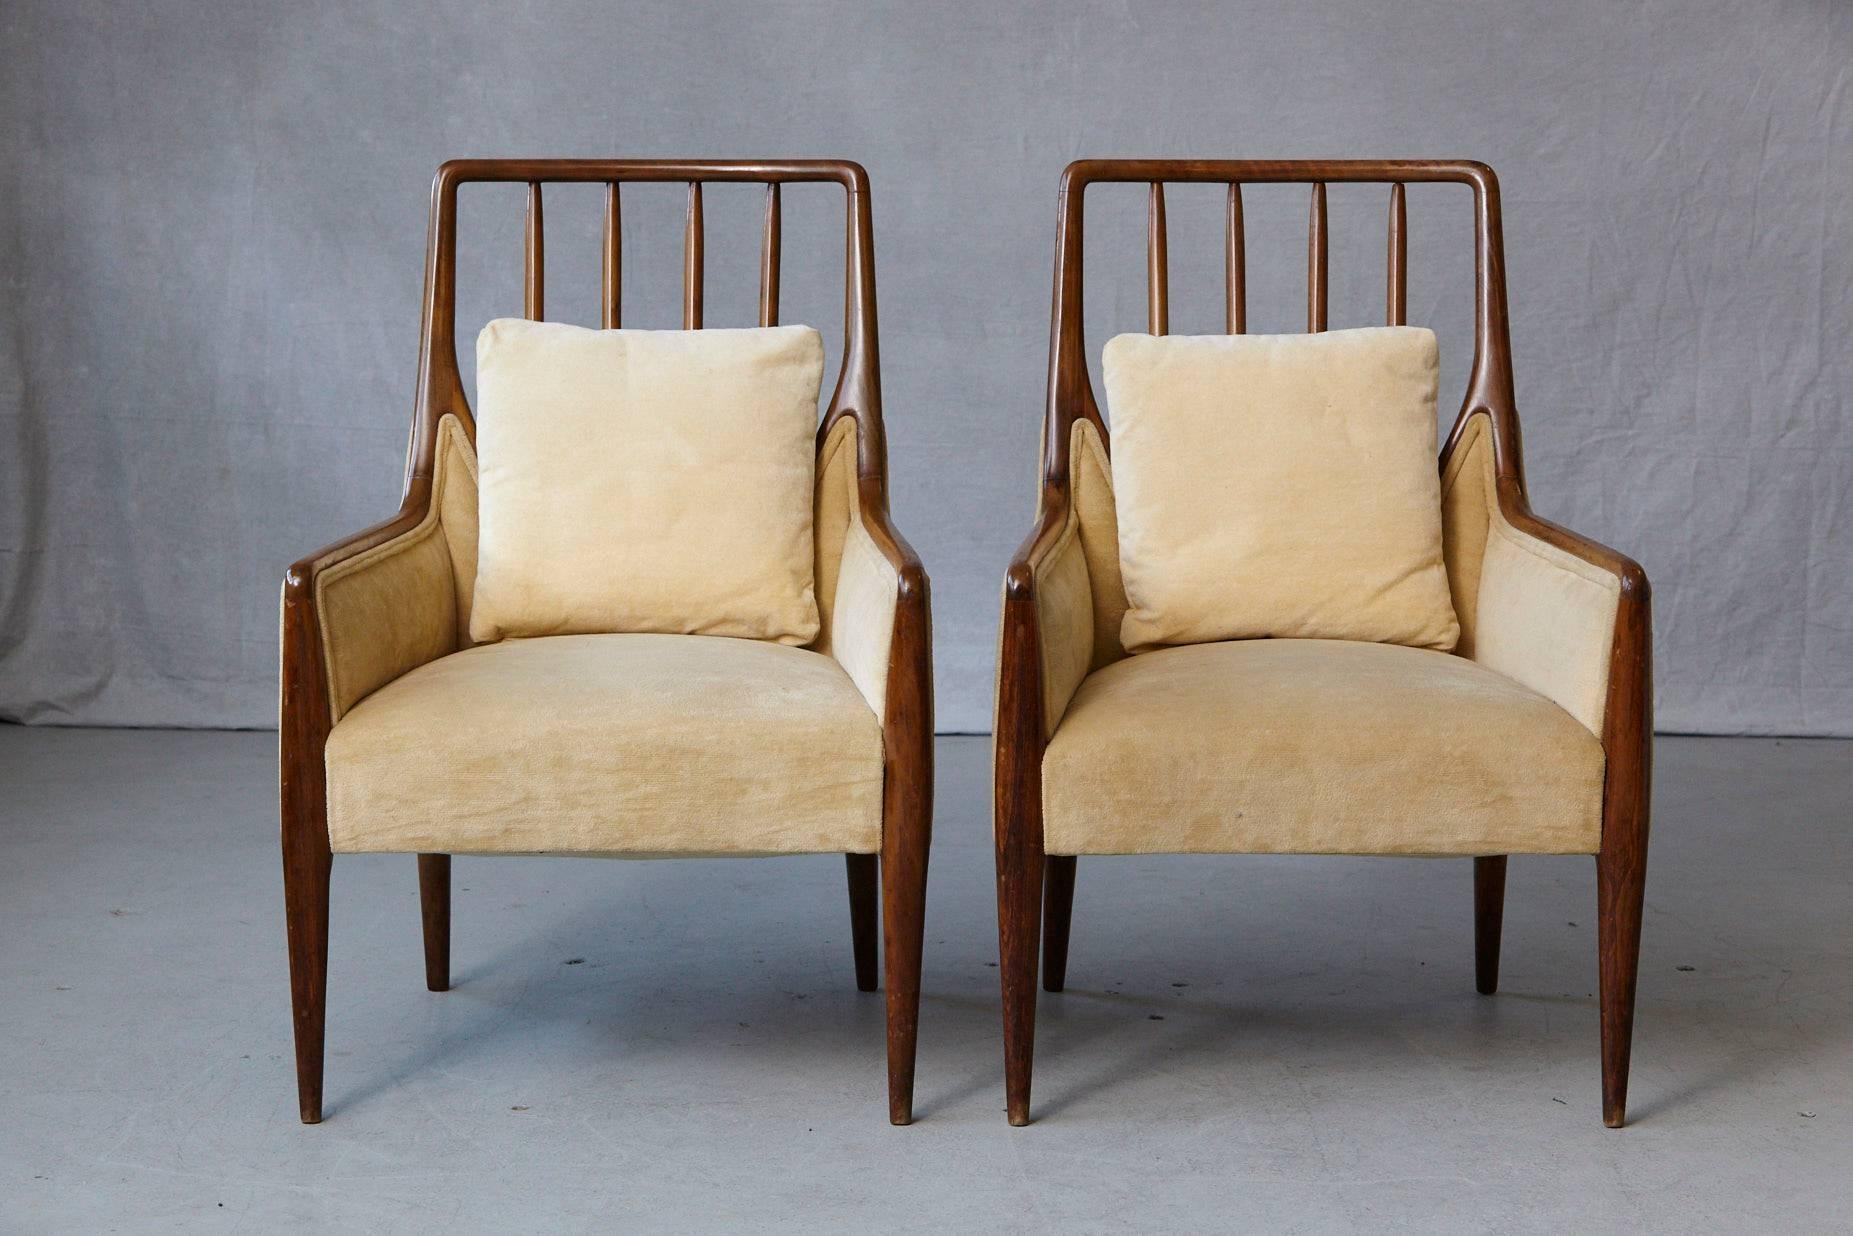 Exceptional pair of high back walnut lounge chairs in the style of T.H. Robsjohn-Gibbings in gold beige velvet fabric with matching pillows in original condition.
There are some scuffs to the legs and back, please refer to the detailed photos.